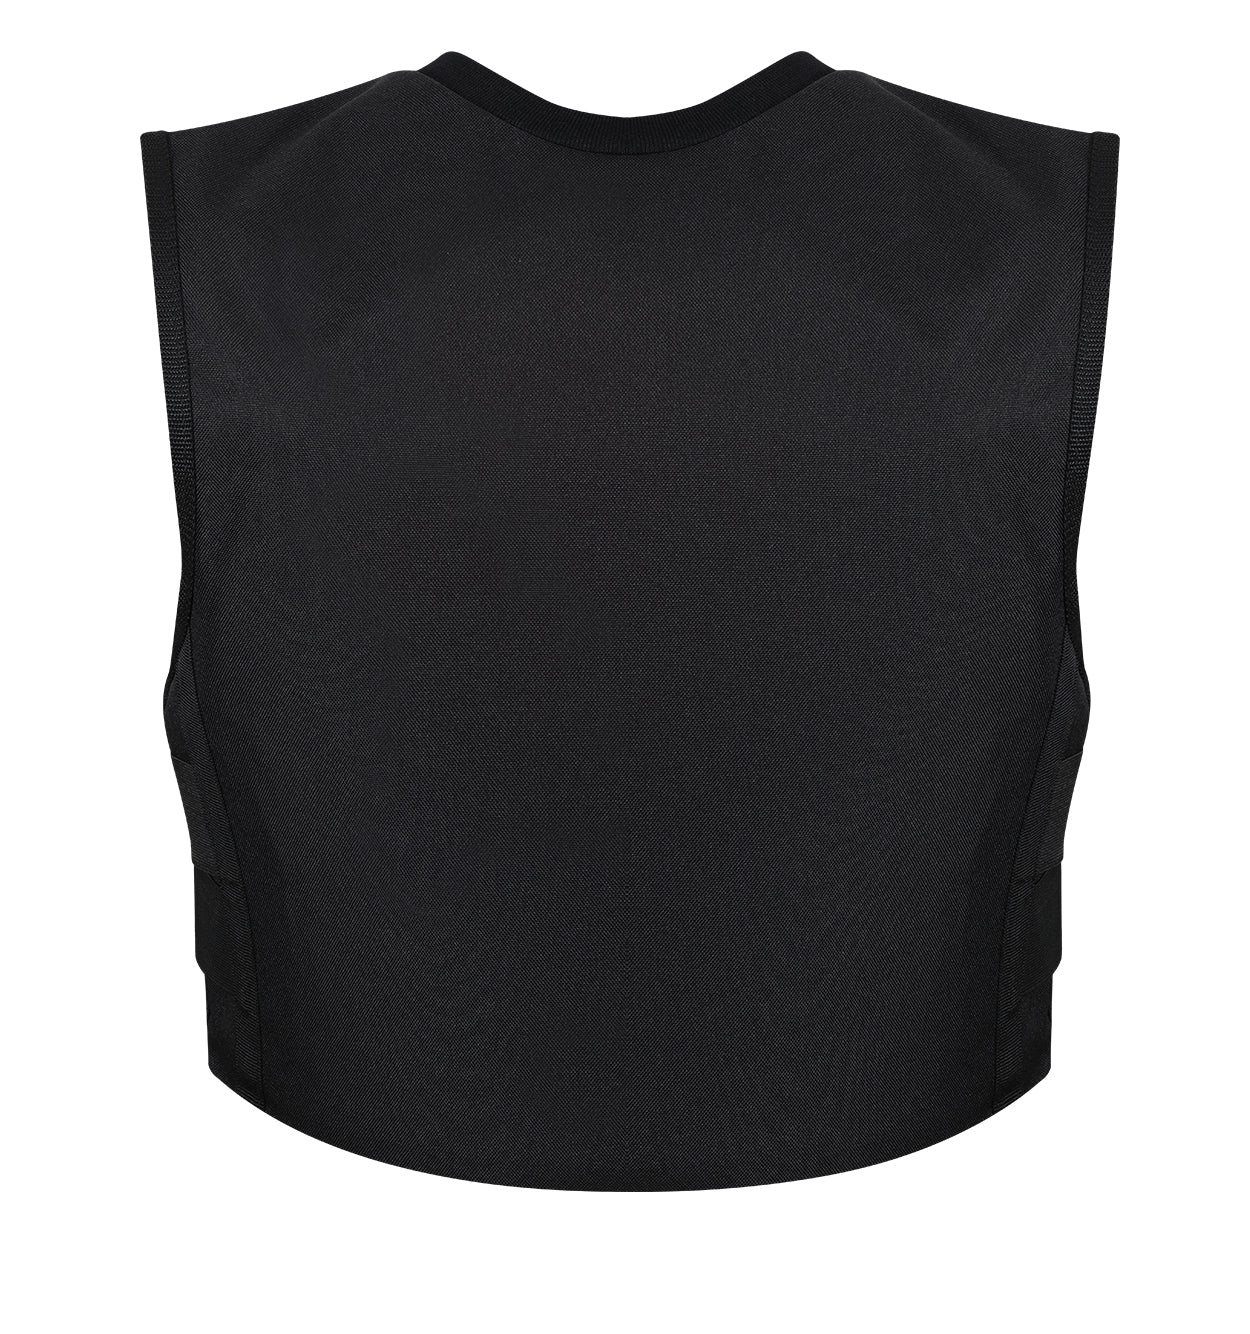 Black/blue OVERT Bulletproof Vest Military, Police, Security Equipment  Level 3 & 3A Protection